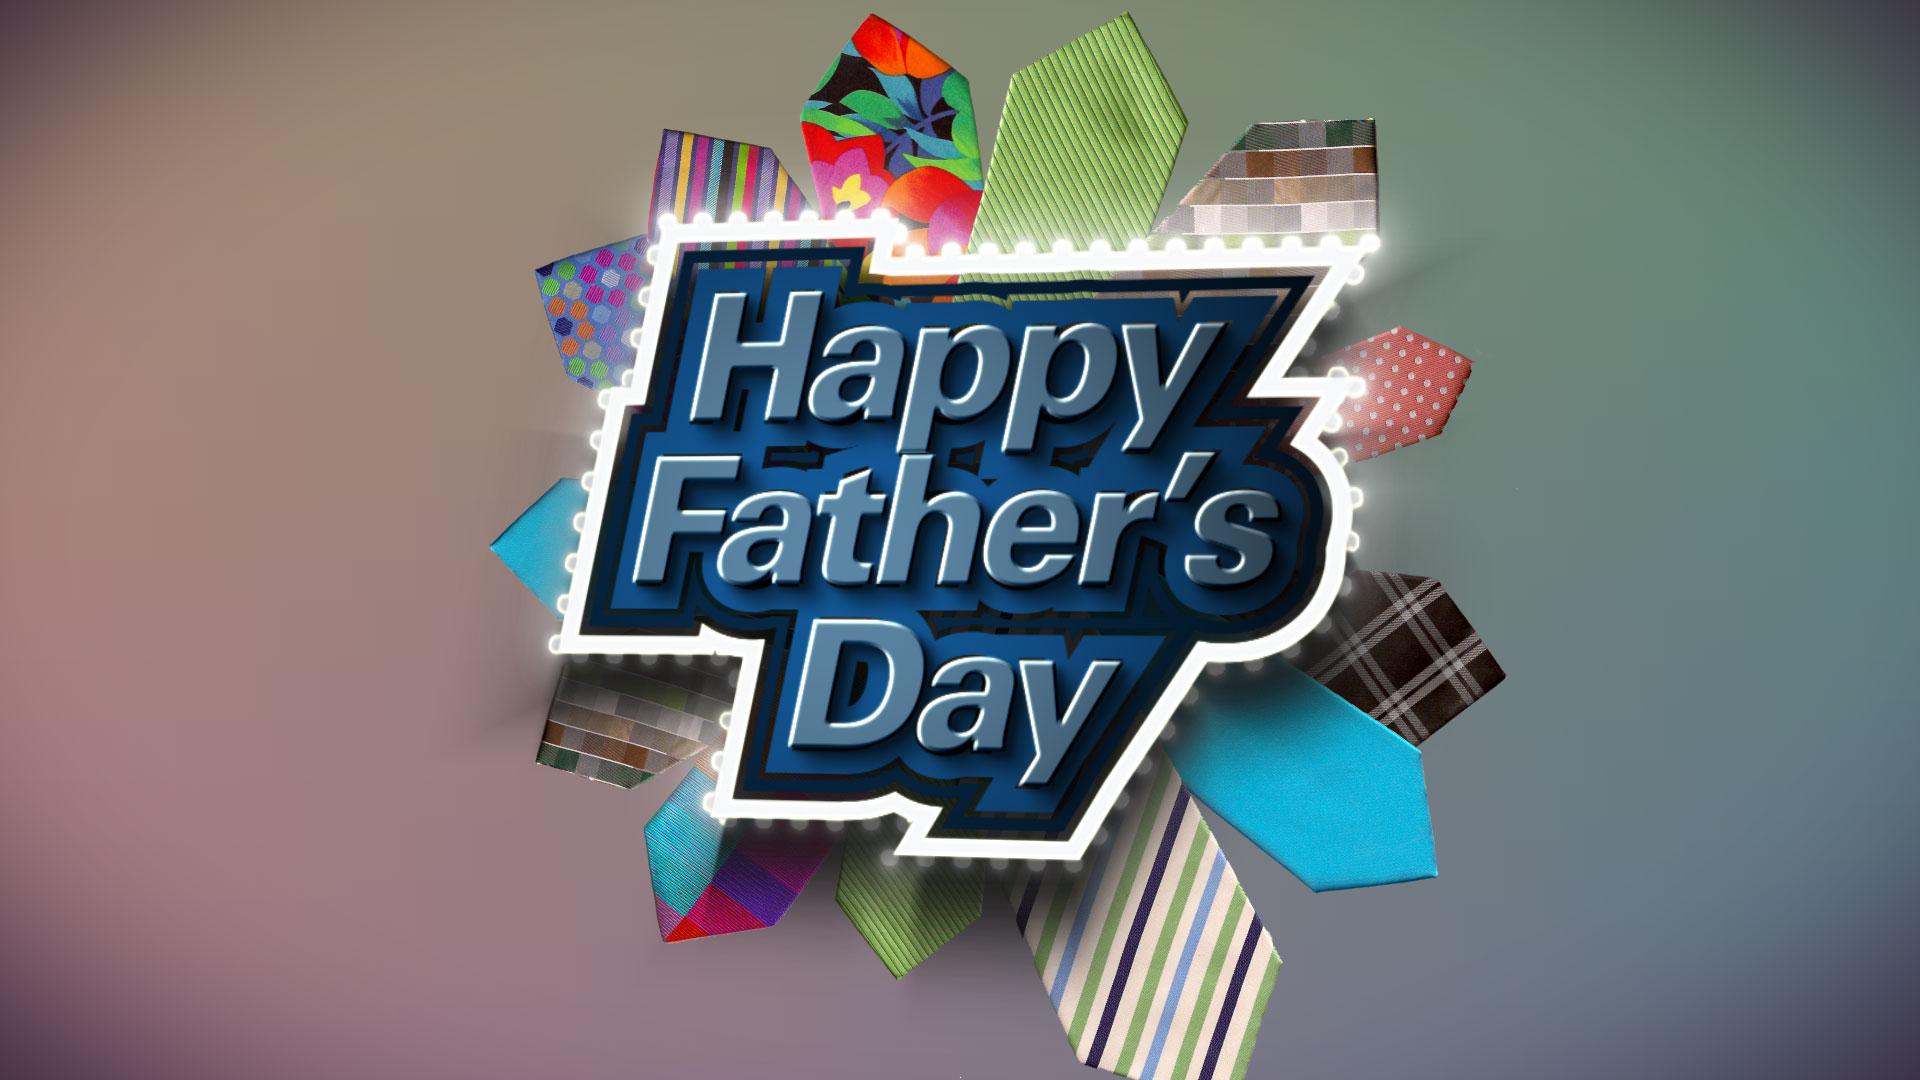 Download Happy fathers day hd wallpaper for mobile - Fathers day for your  mobile cell phone